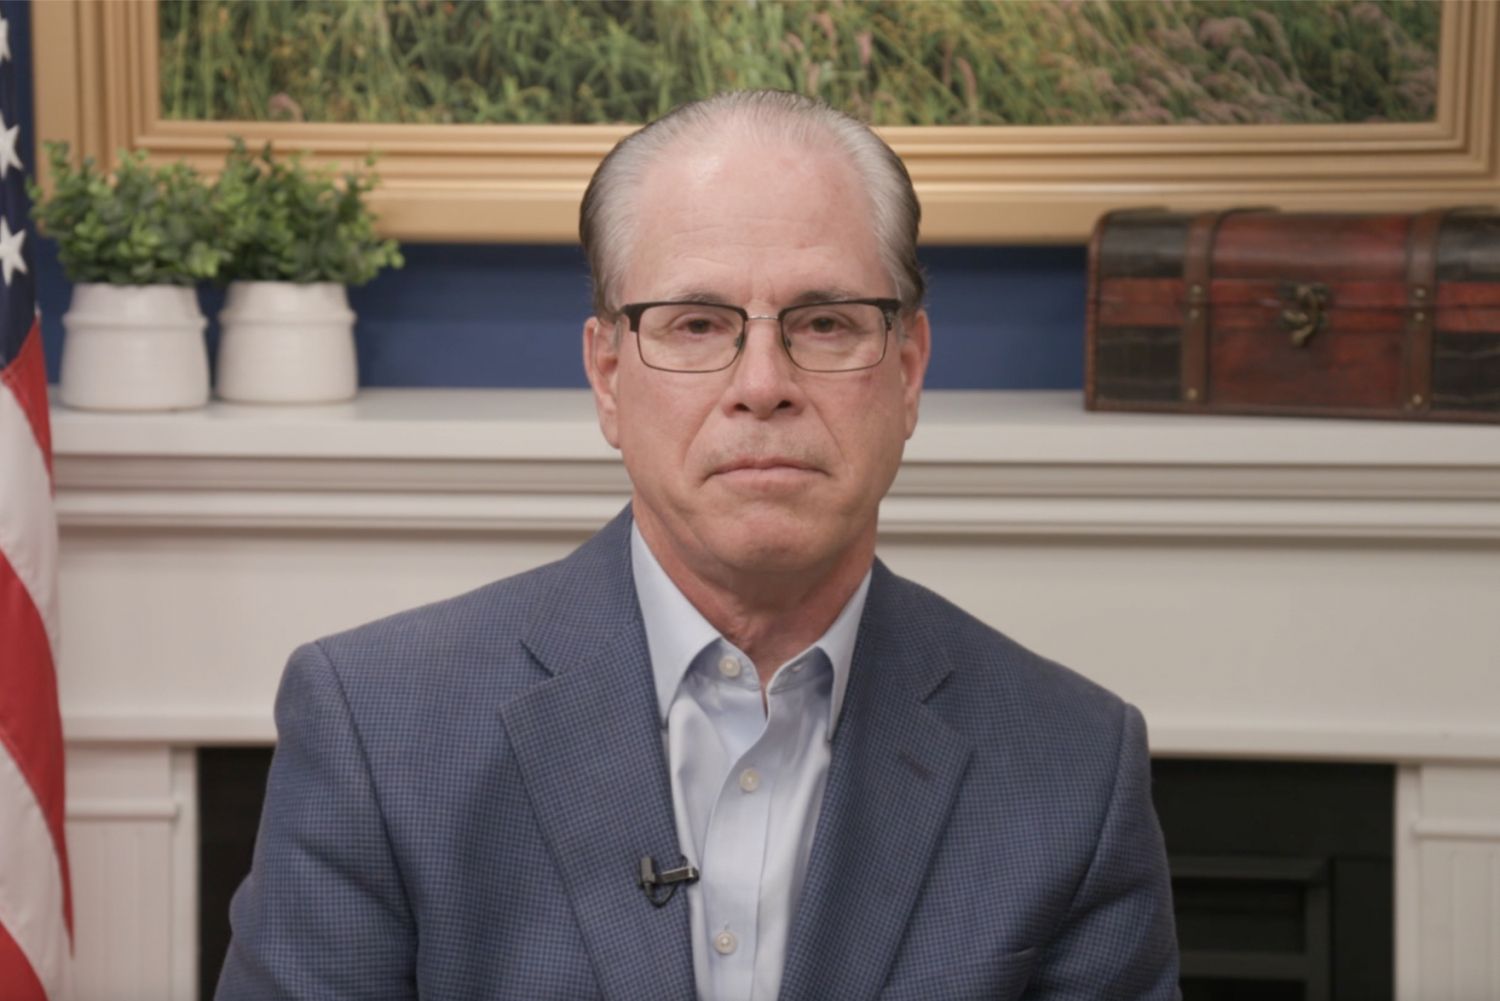 Opinion: Sen. Mike Braun's comments on interracial marriage reveal classic White Catholic racism